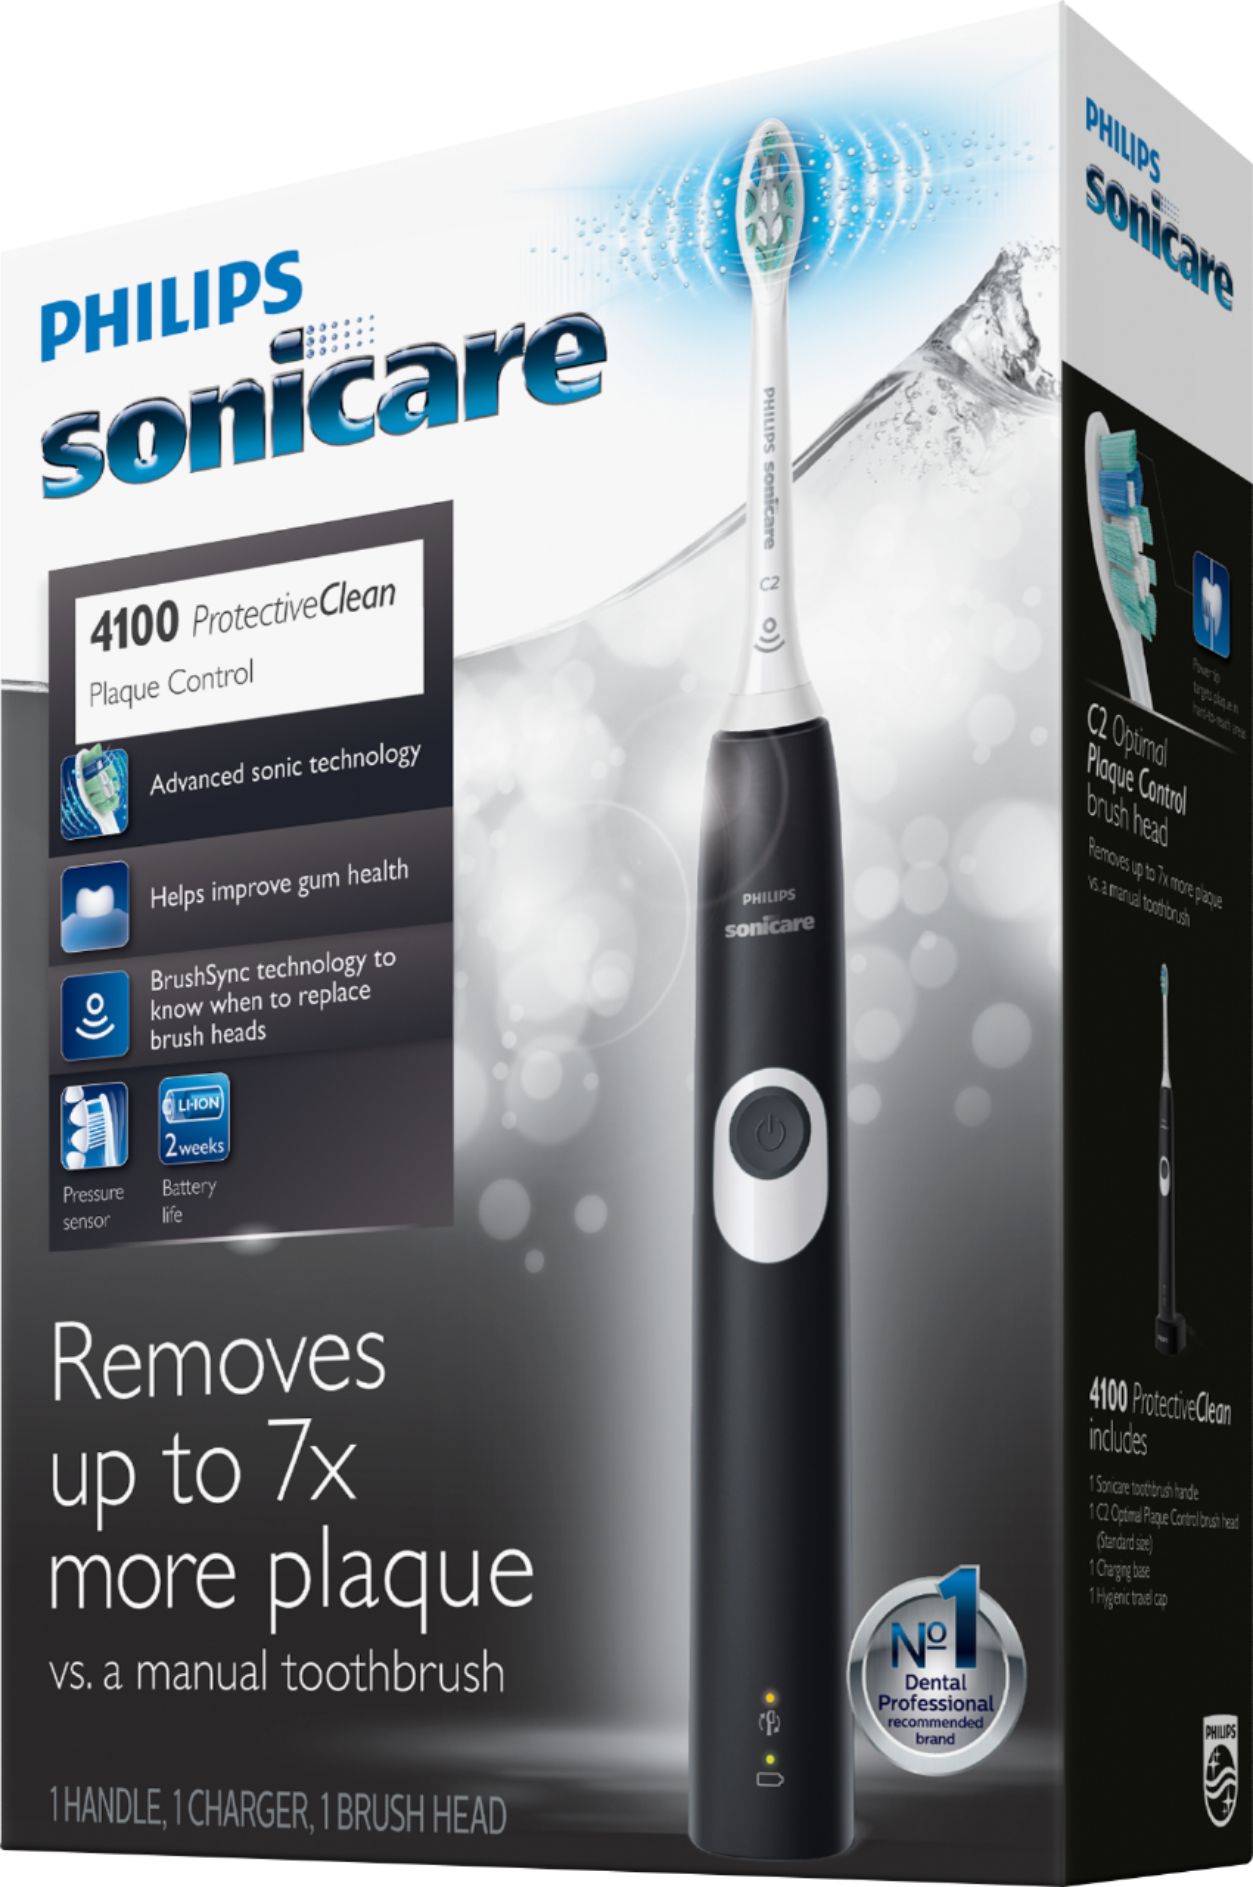 philips-sonicare-protectiveclean-4100-cheap-deals-save-47-jlcatj-gob-mx